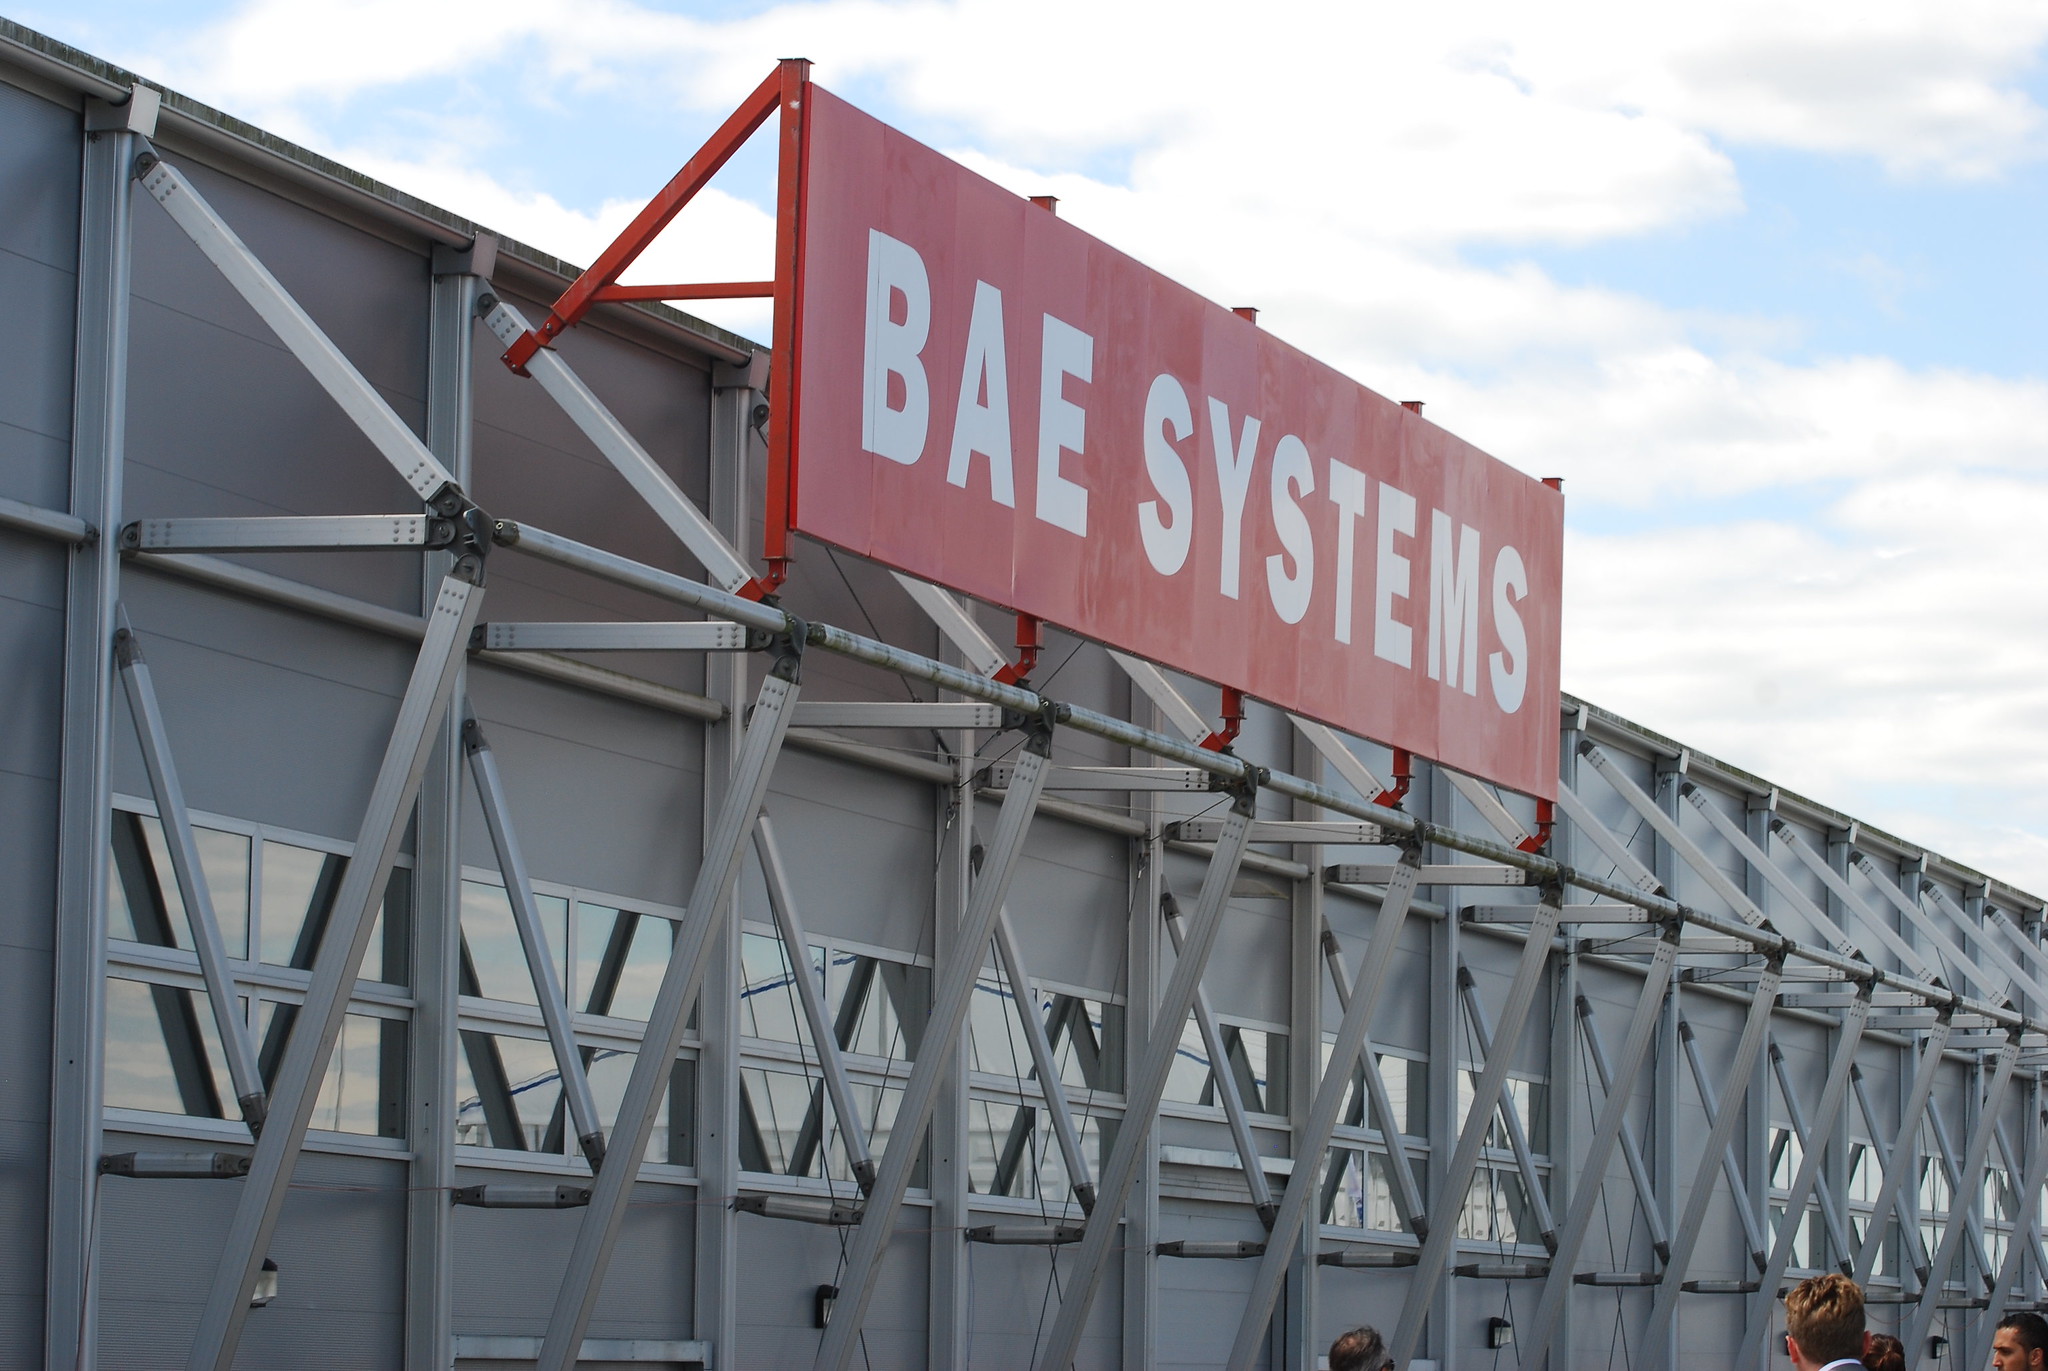 BAE Systems sign on a building